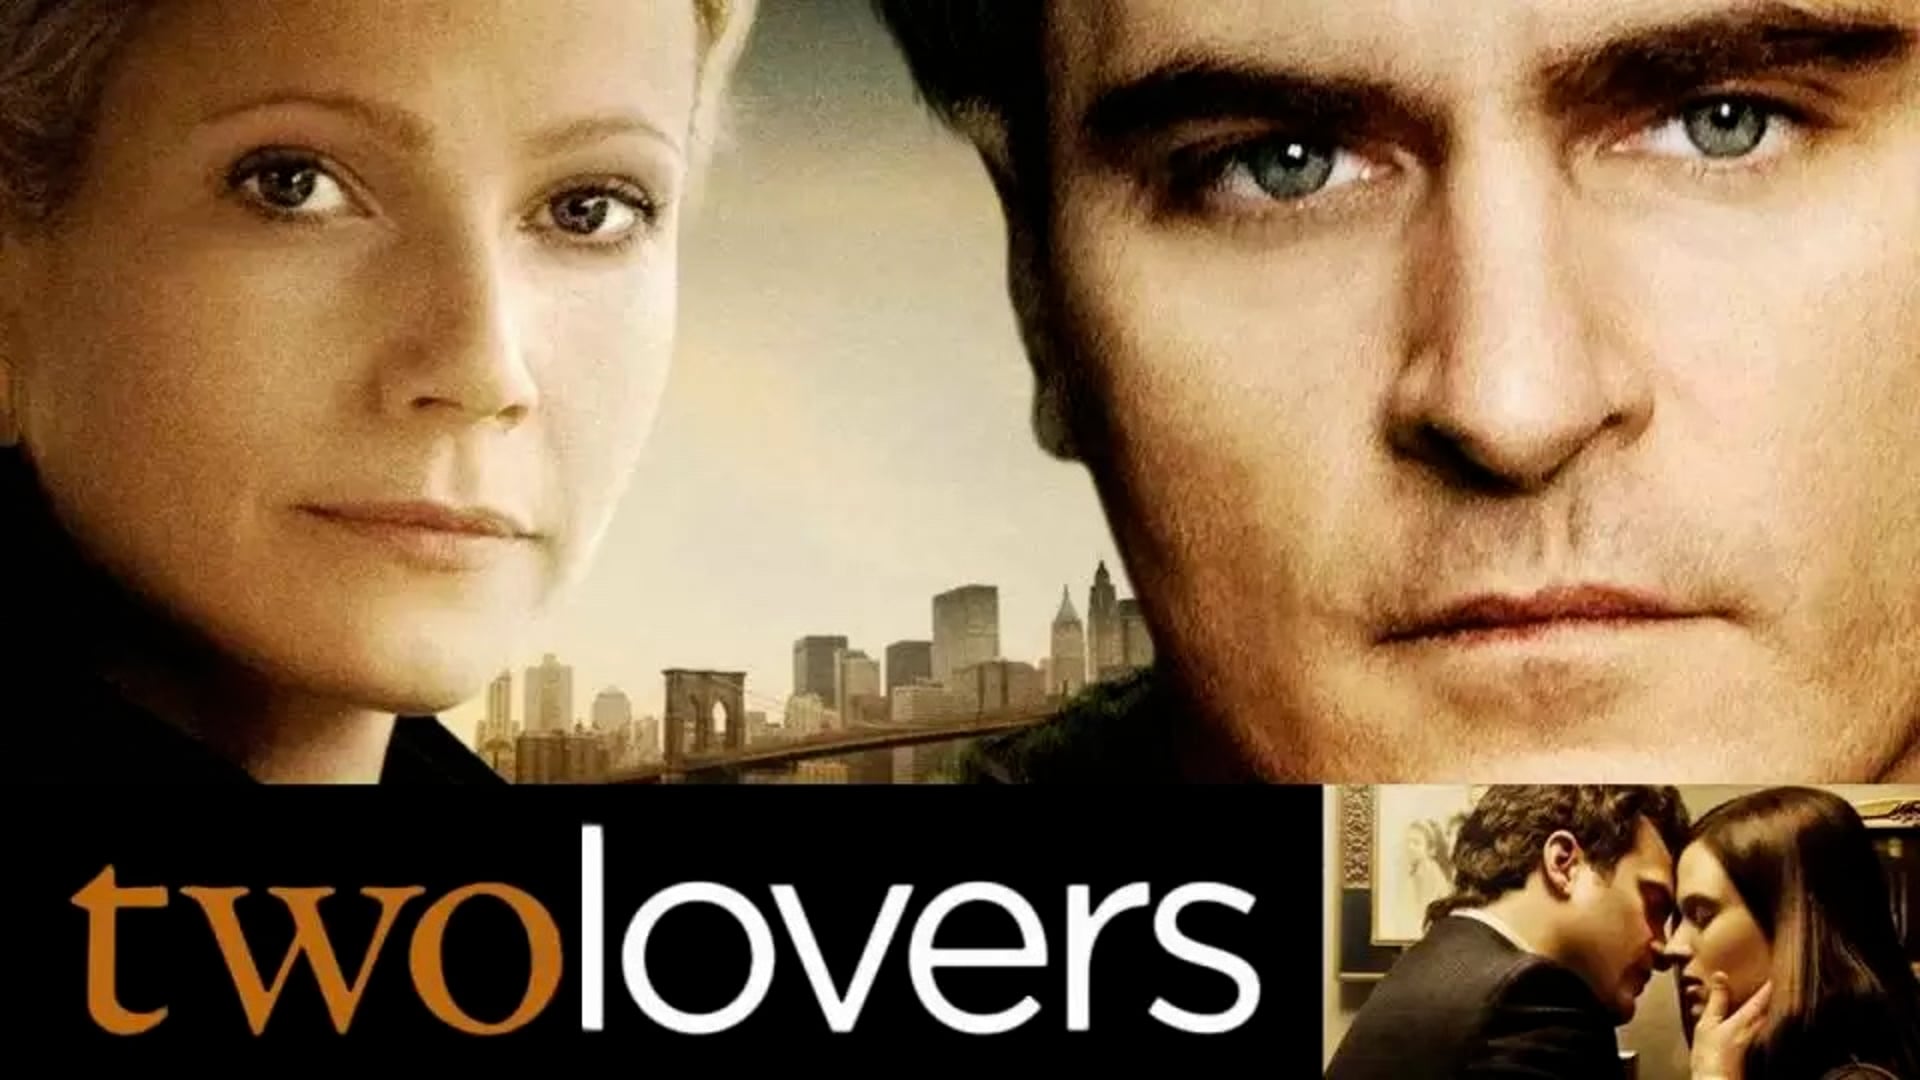 Two Lovers - Theatrical Trailer